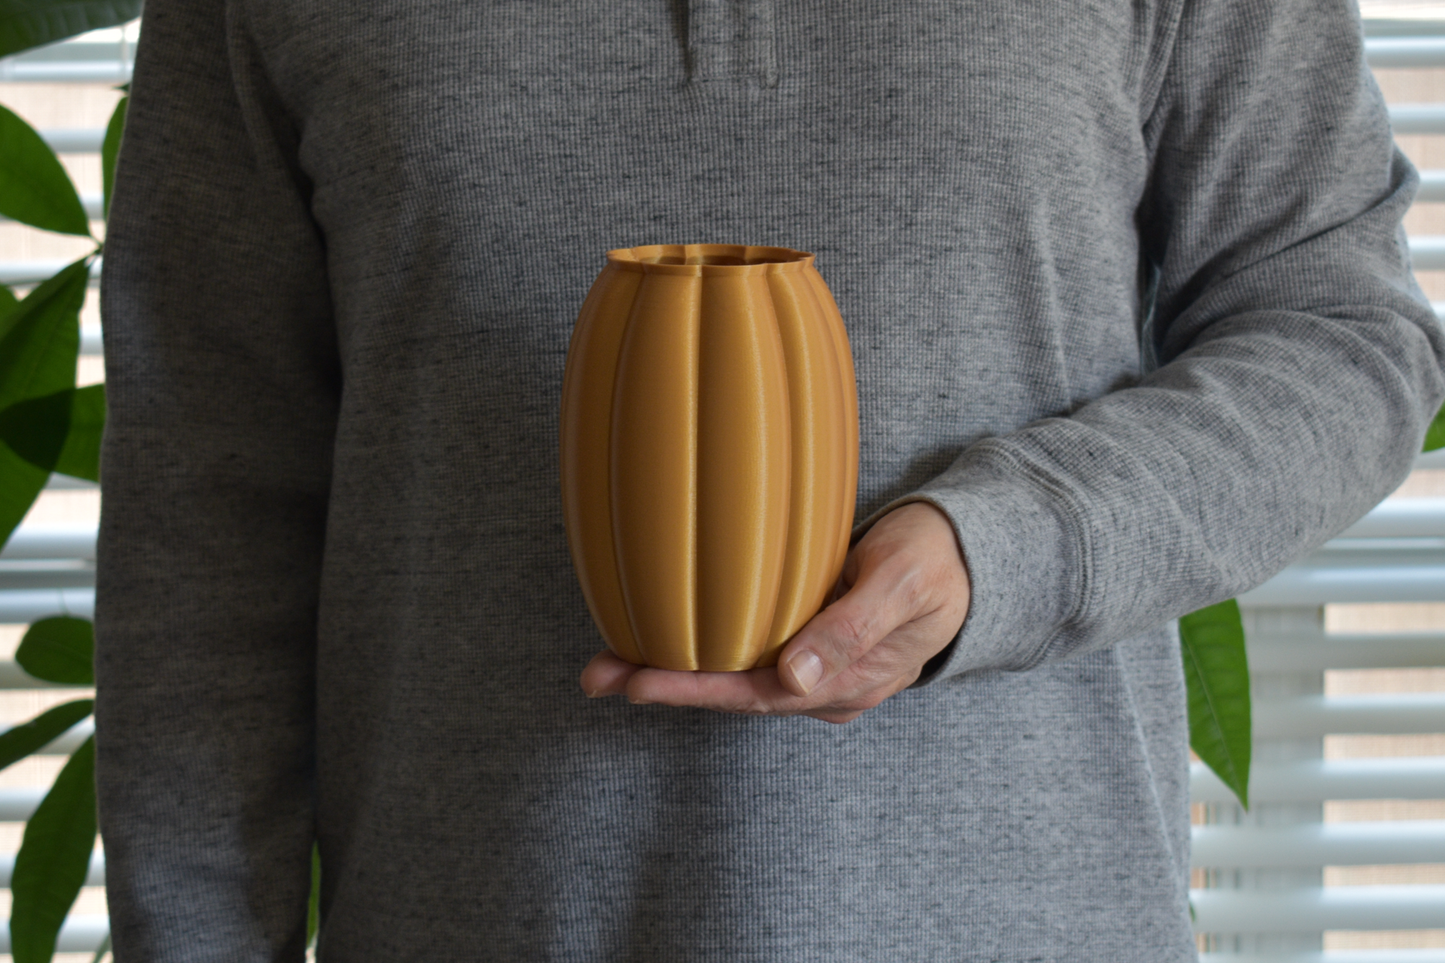 Tall Pumpkin Planter or Dry Vase, Indoor or Outdoor For Thanksgiving, Weddings, Baby Showers, and Fall Decor